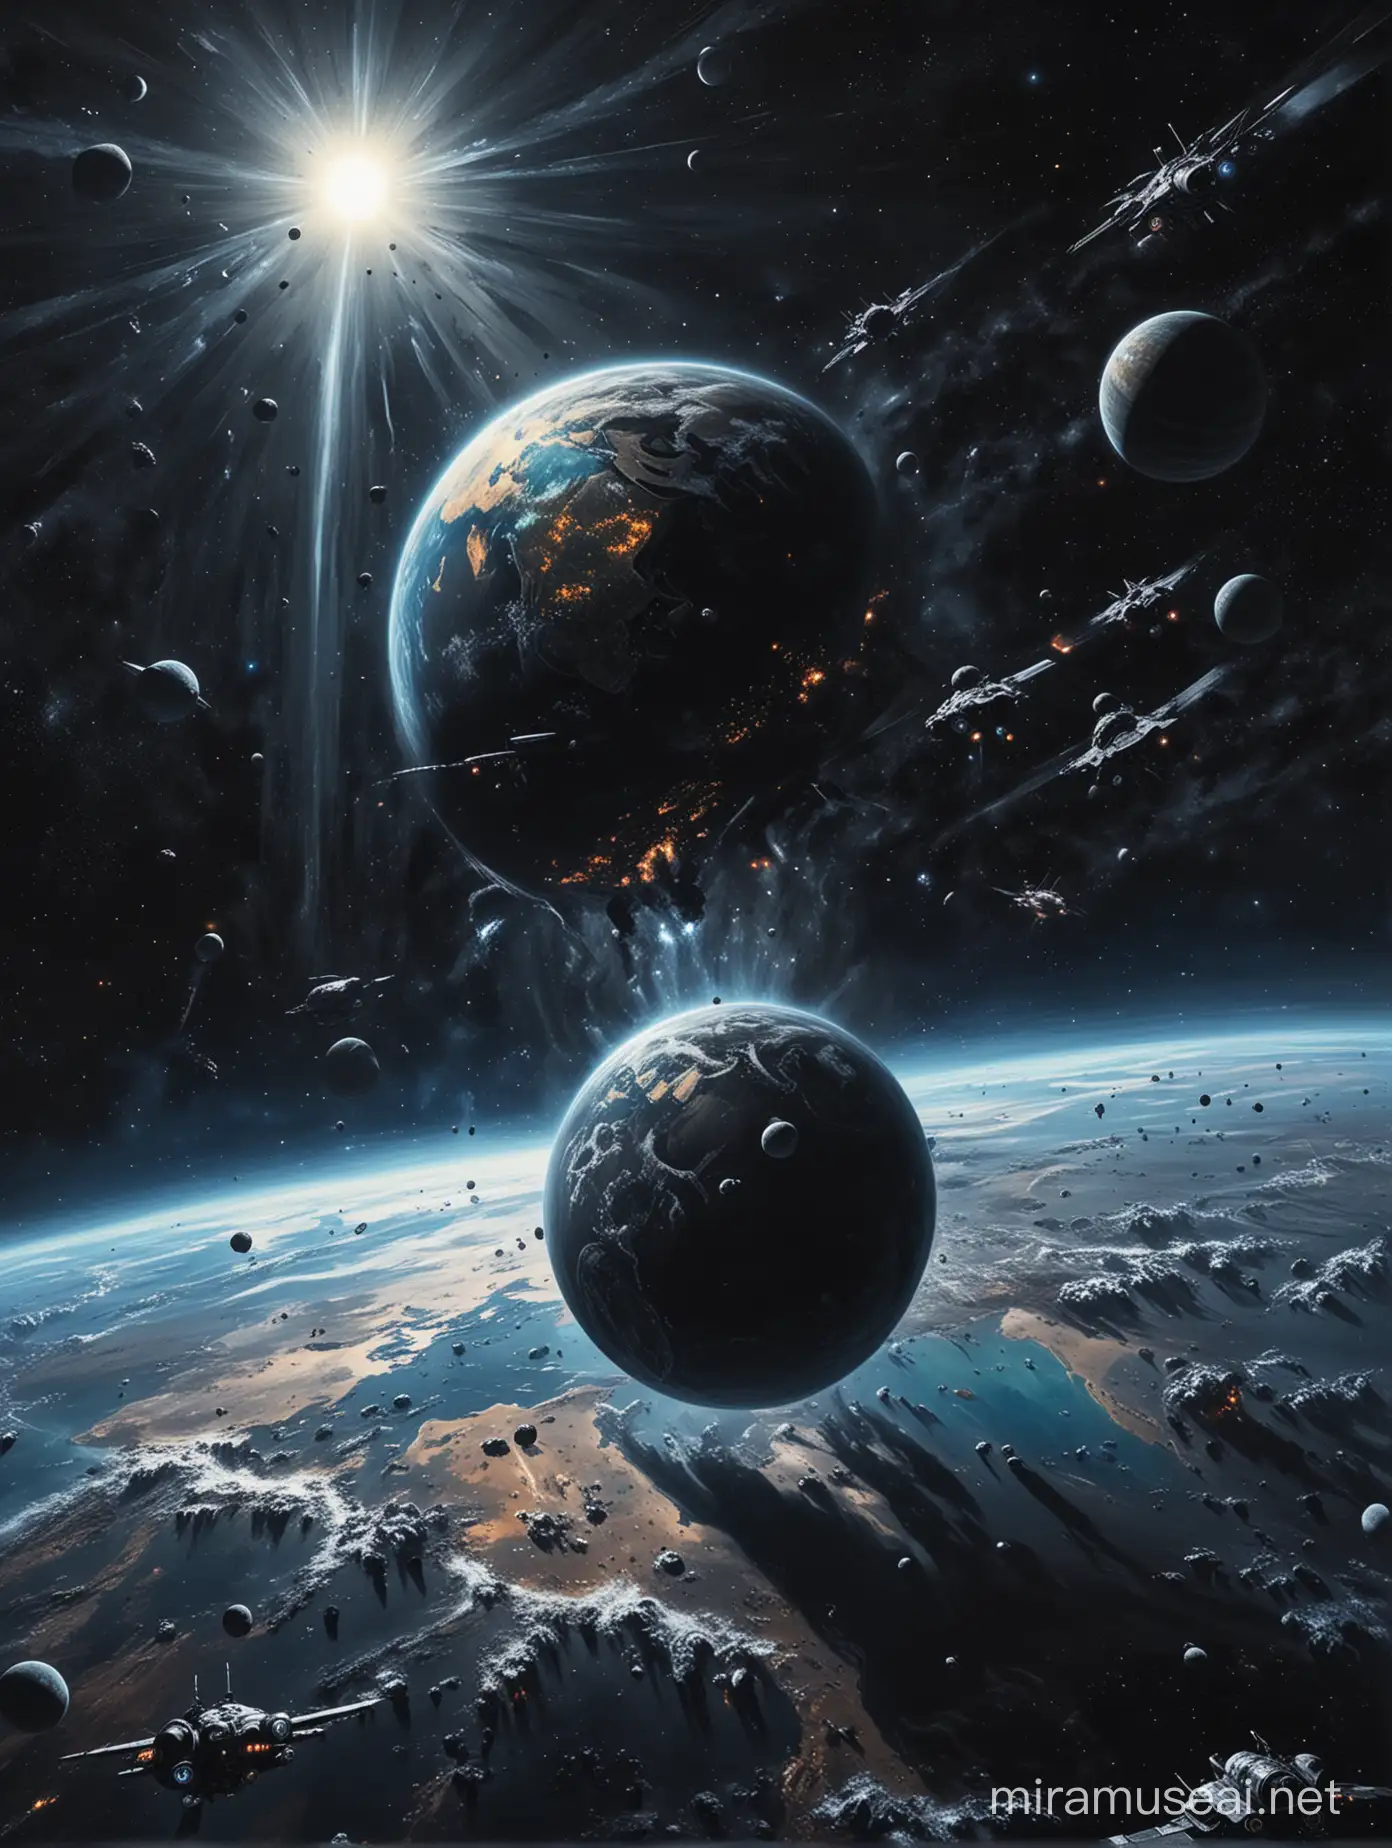 Highly detailed painting, wide view of The Earth in black empty space, numerous small spaceships are approaching, space is otherwise empty, avoid misshapen planets, high quality